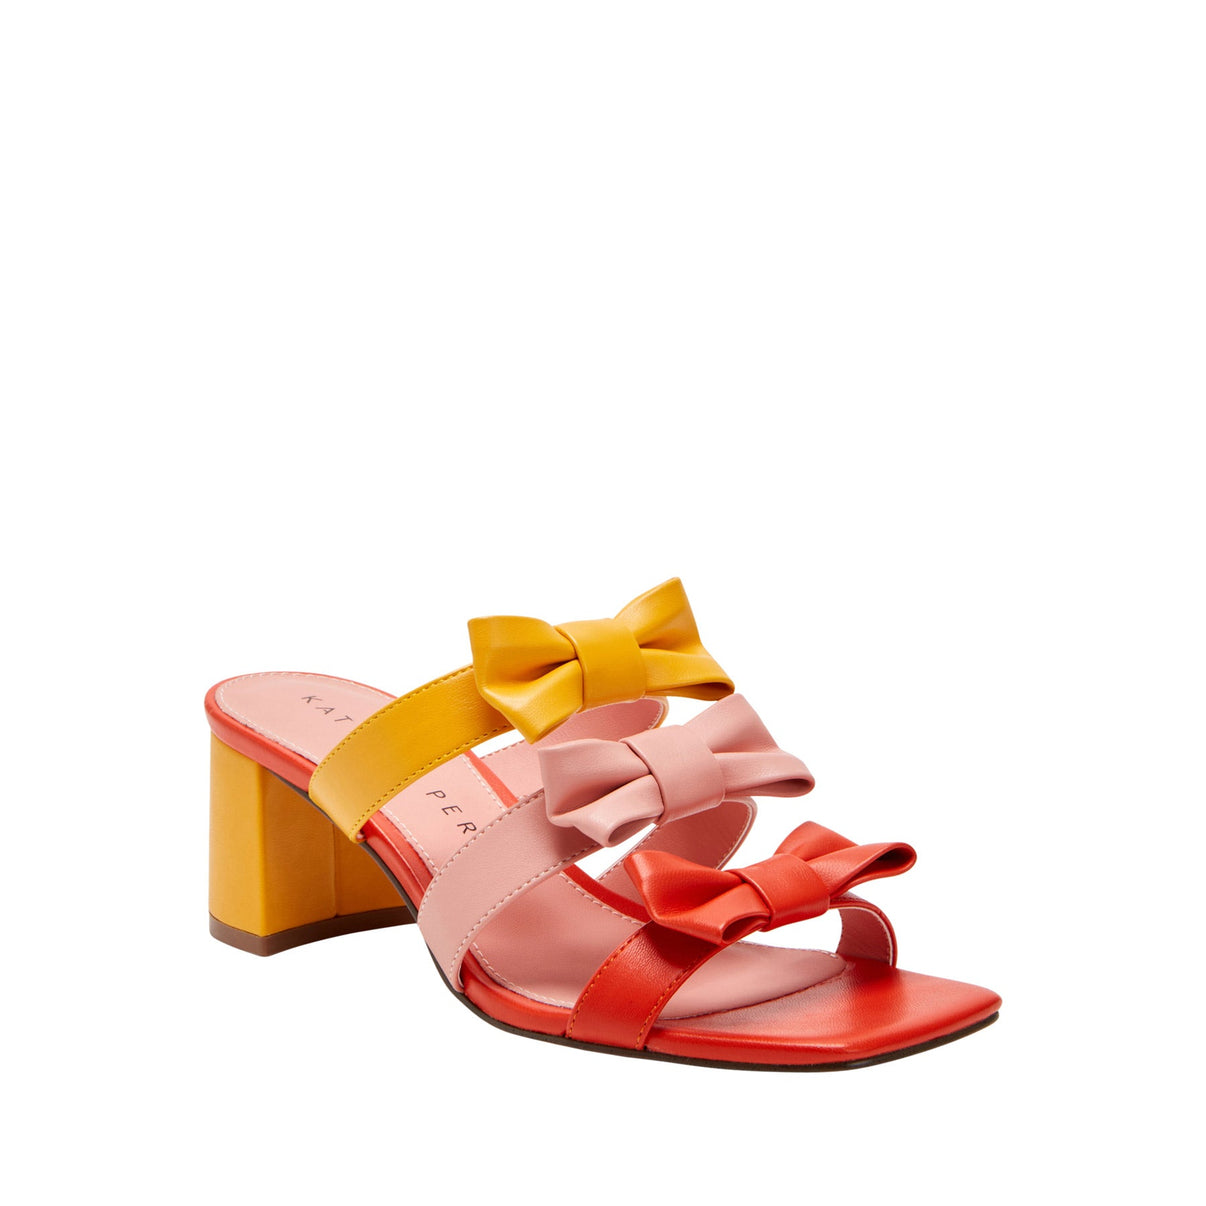 THE TOOLIPED BOW SANDAL – Katy Perry Collections